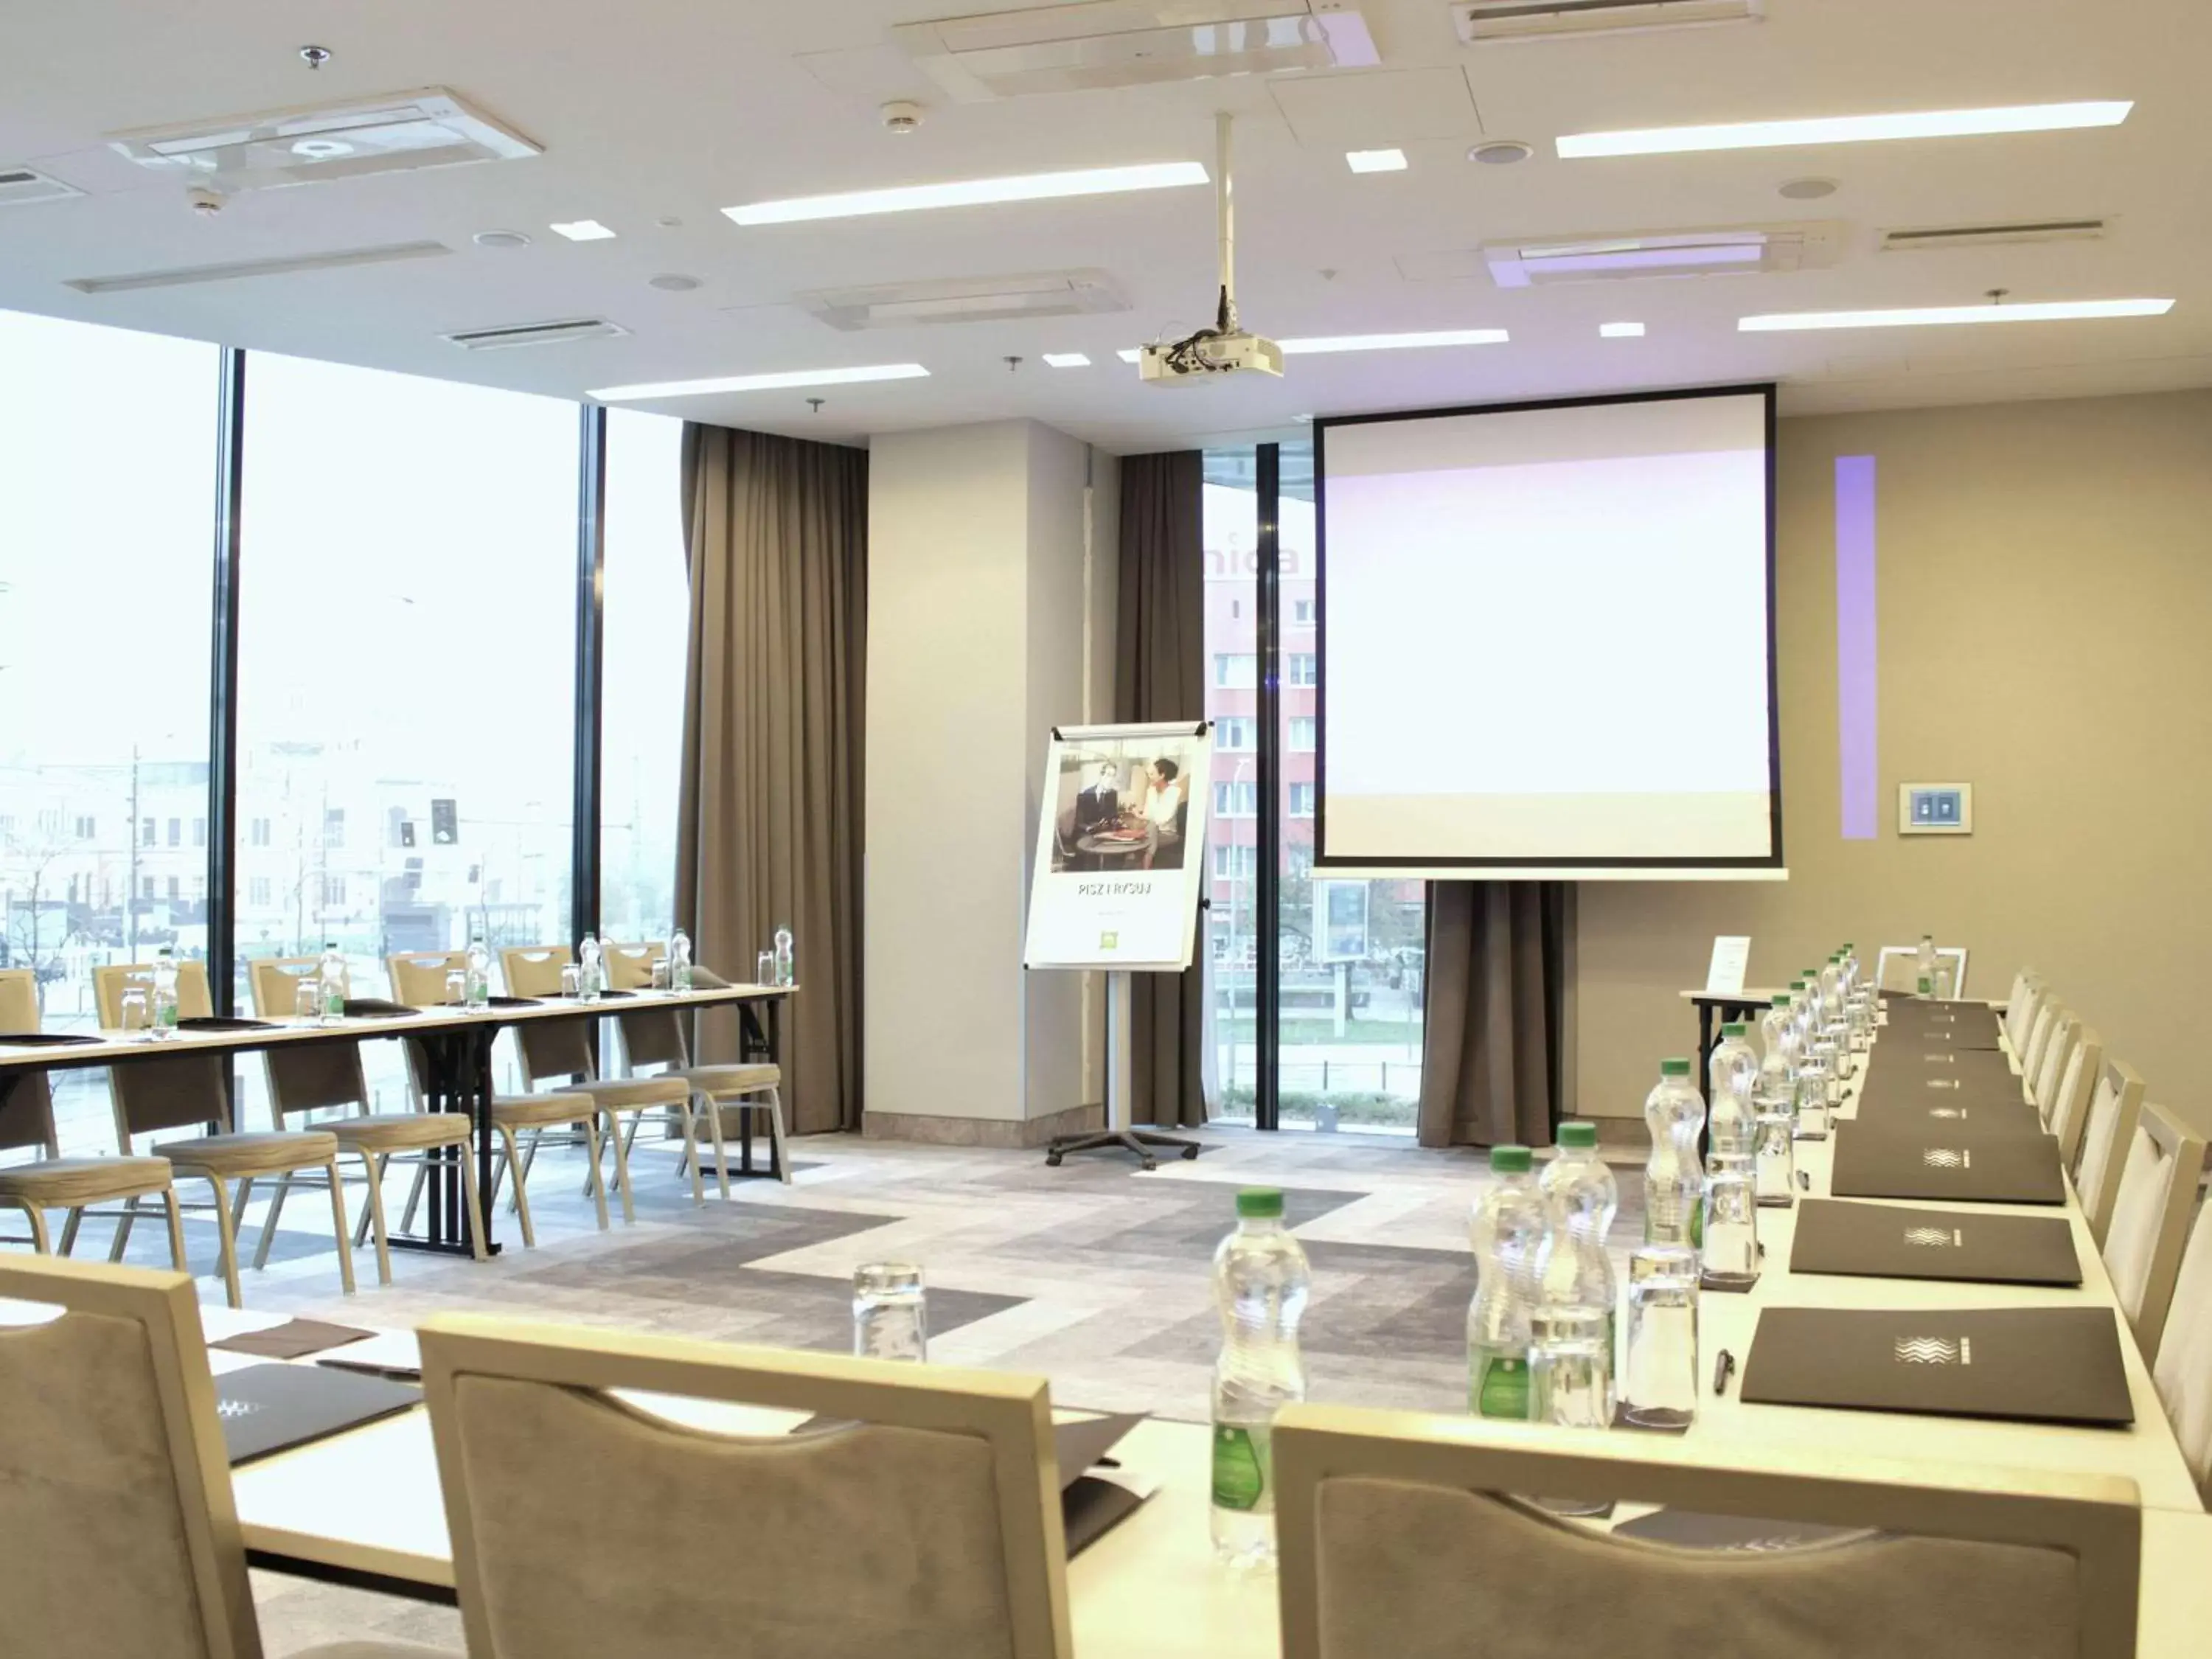 On site, Business Area/Conference Room in Ibis Styles Wroclaw Centrum